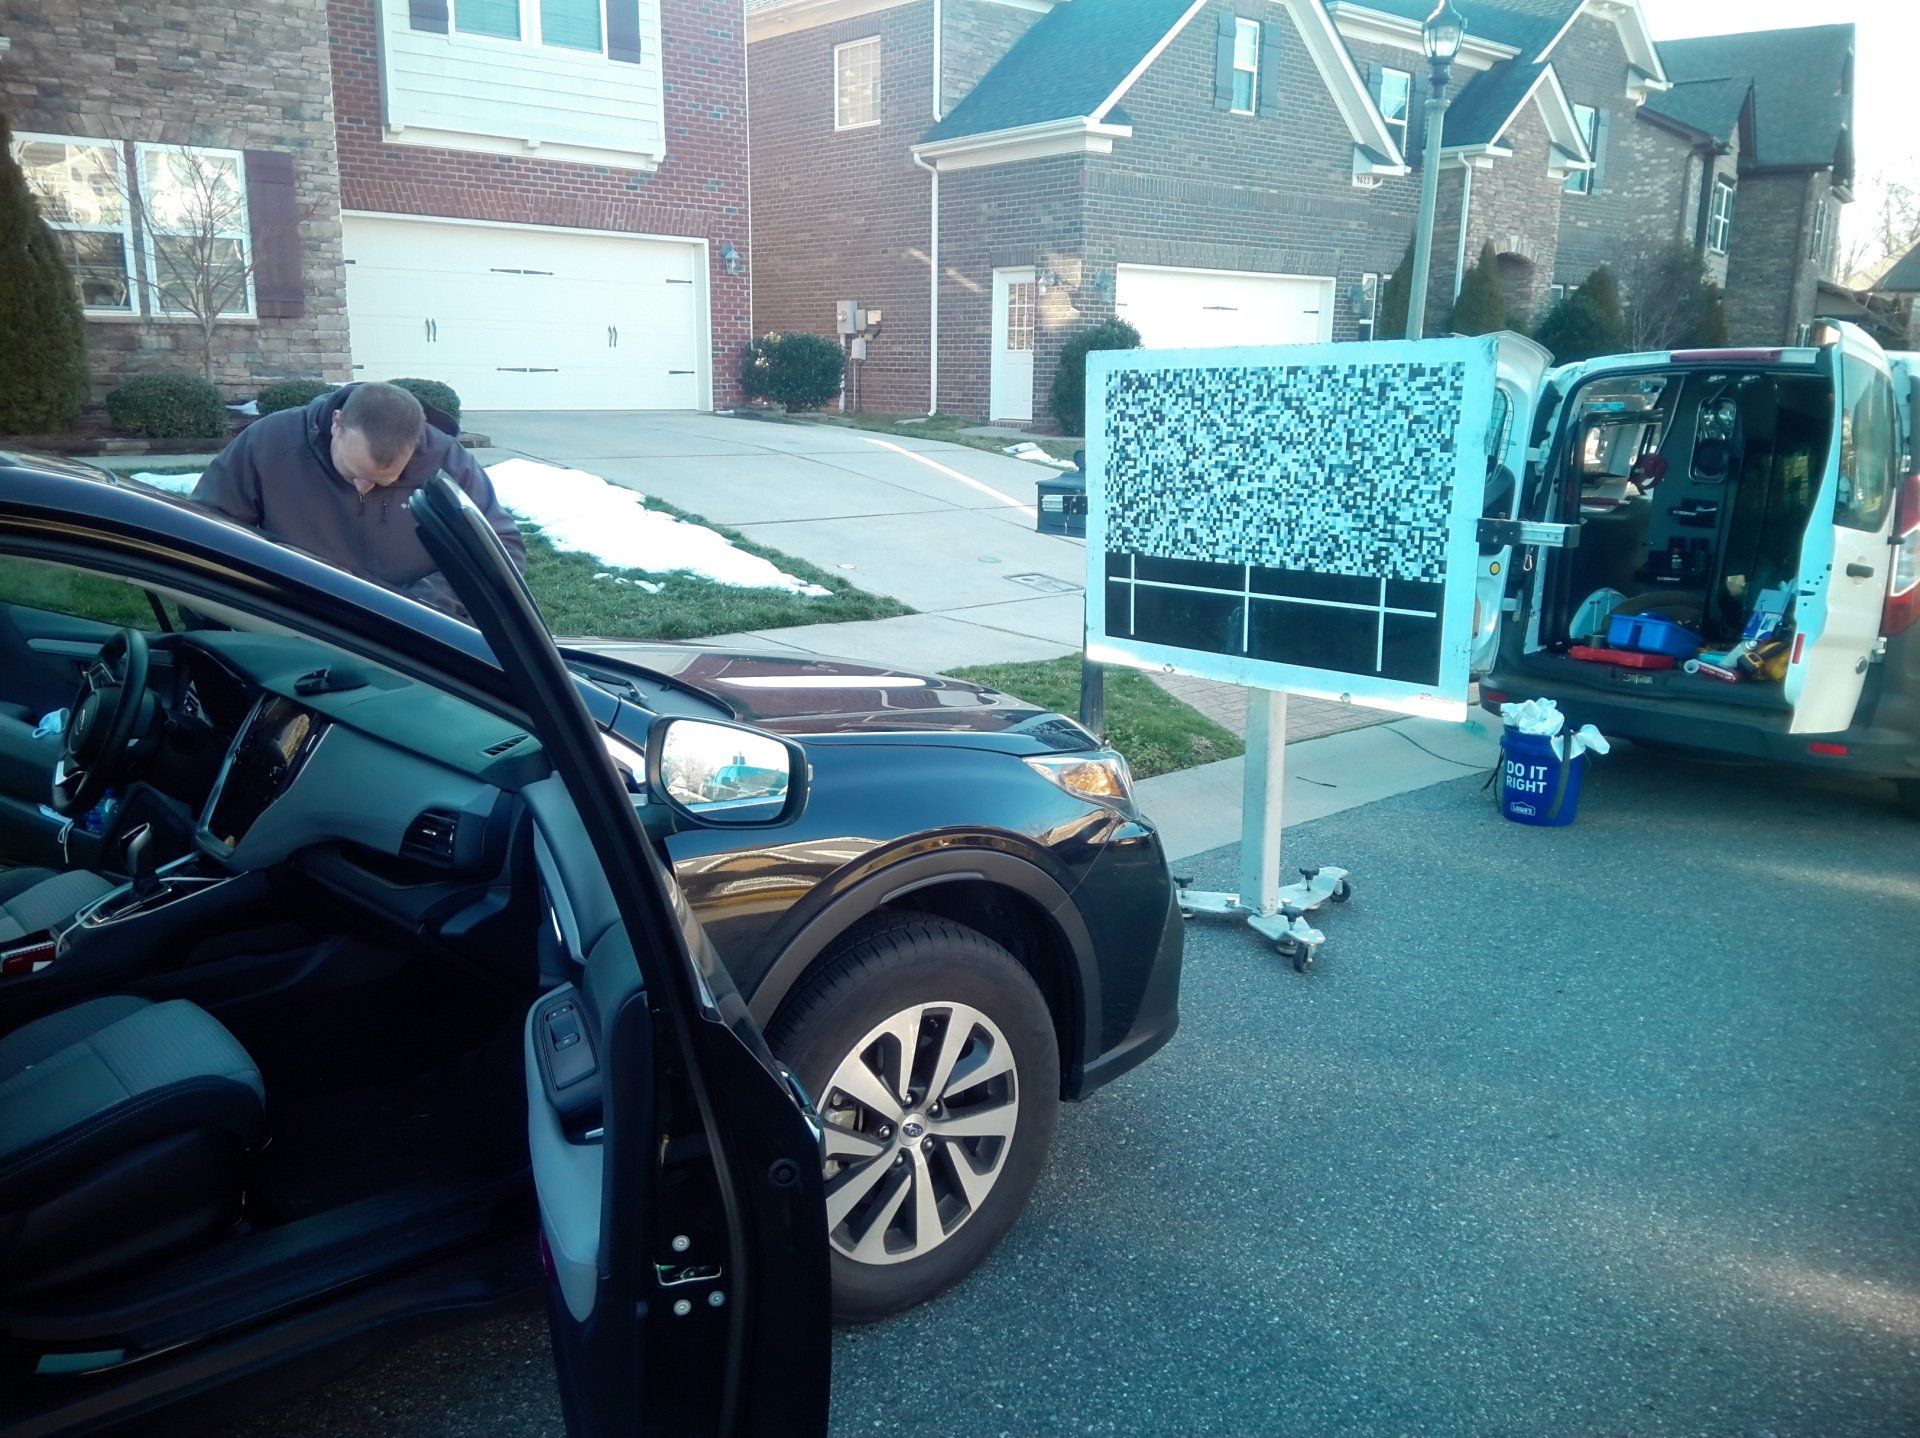 Camera System Recalibration in Charlotte, NC